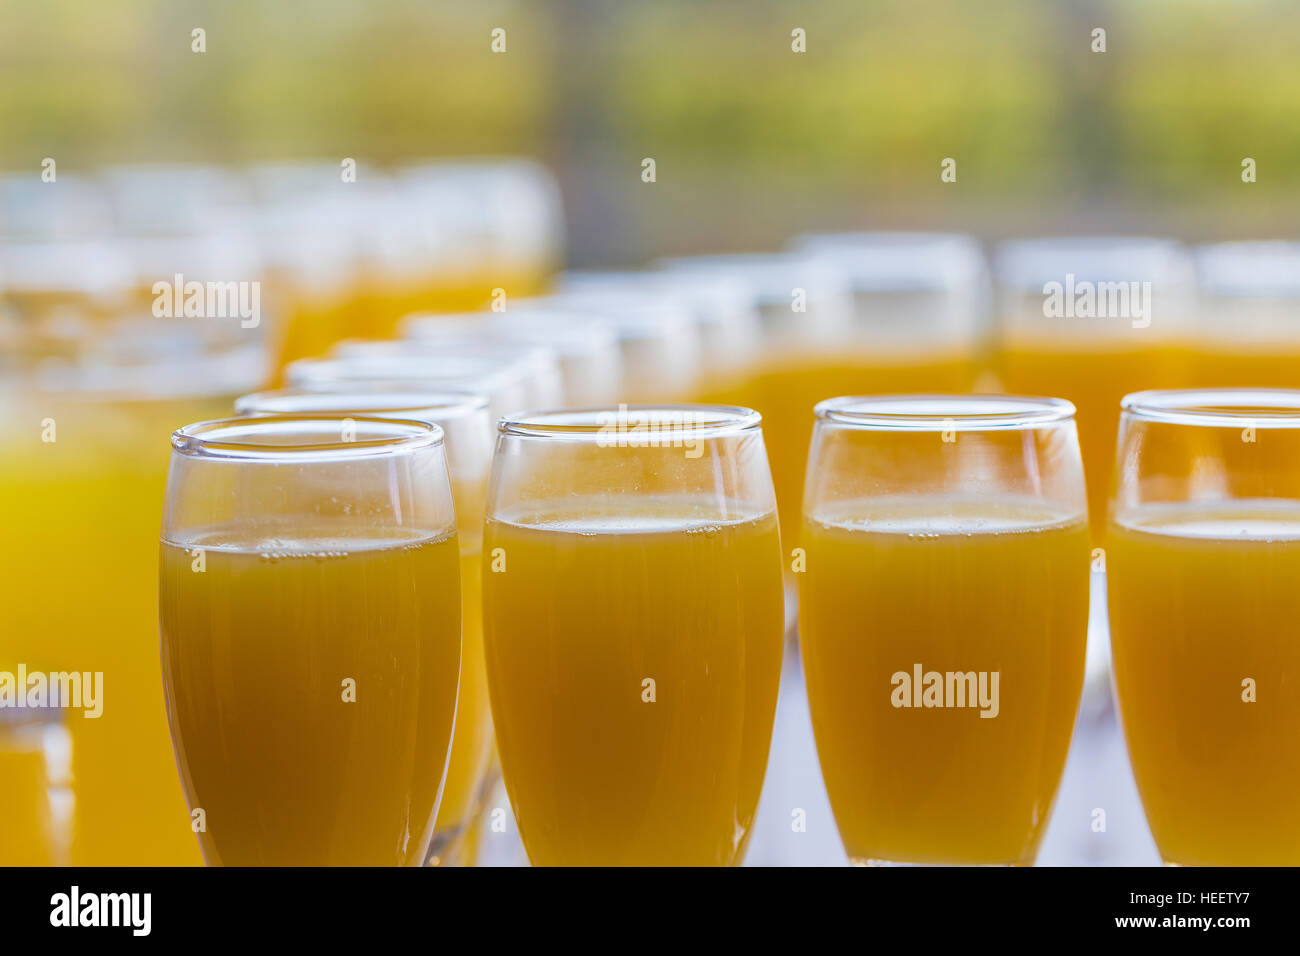 Rows of champagne glasses filled with orange juice / bucks fizz at wedding reception Stock Photo